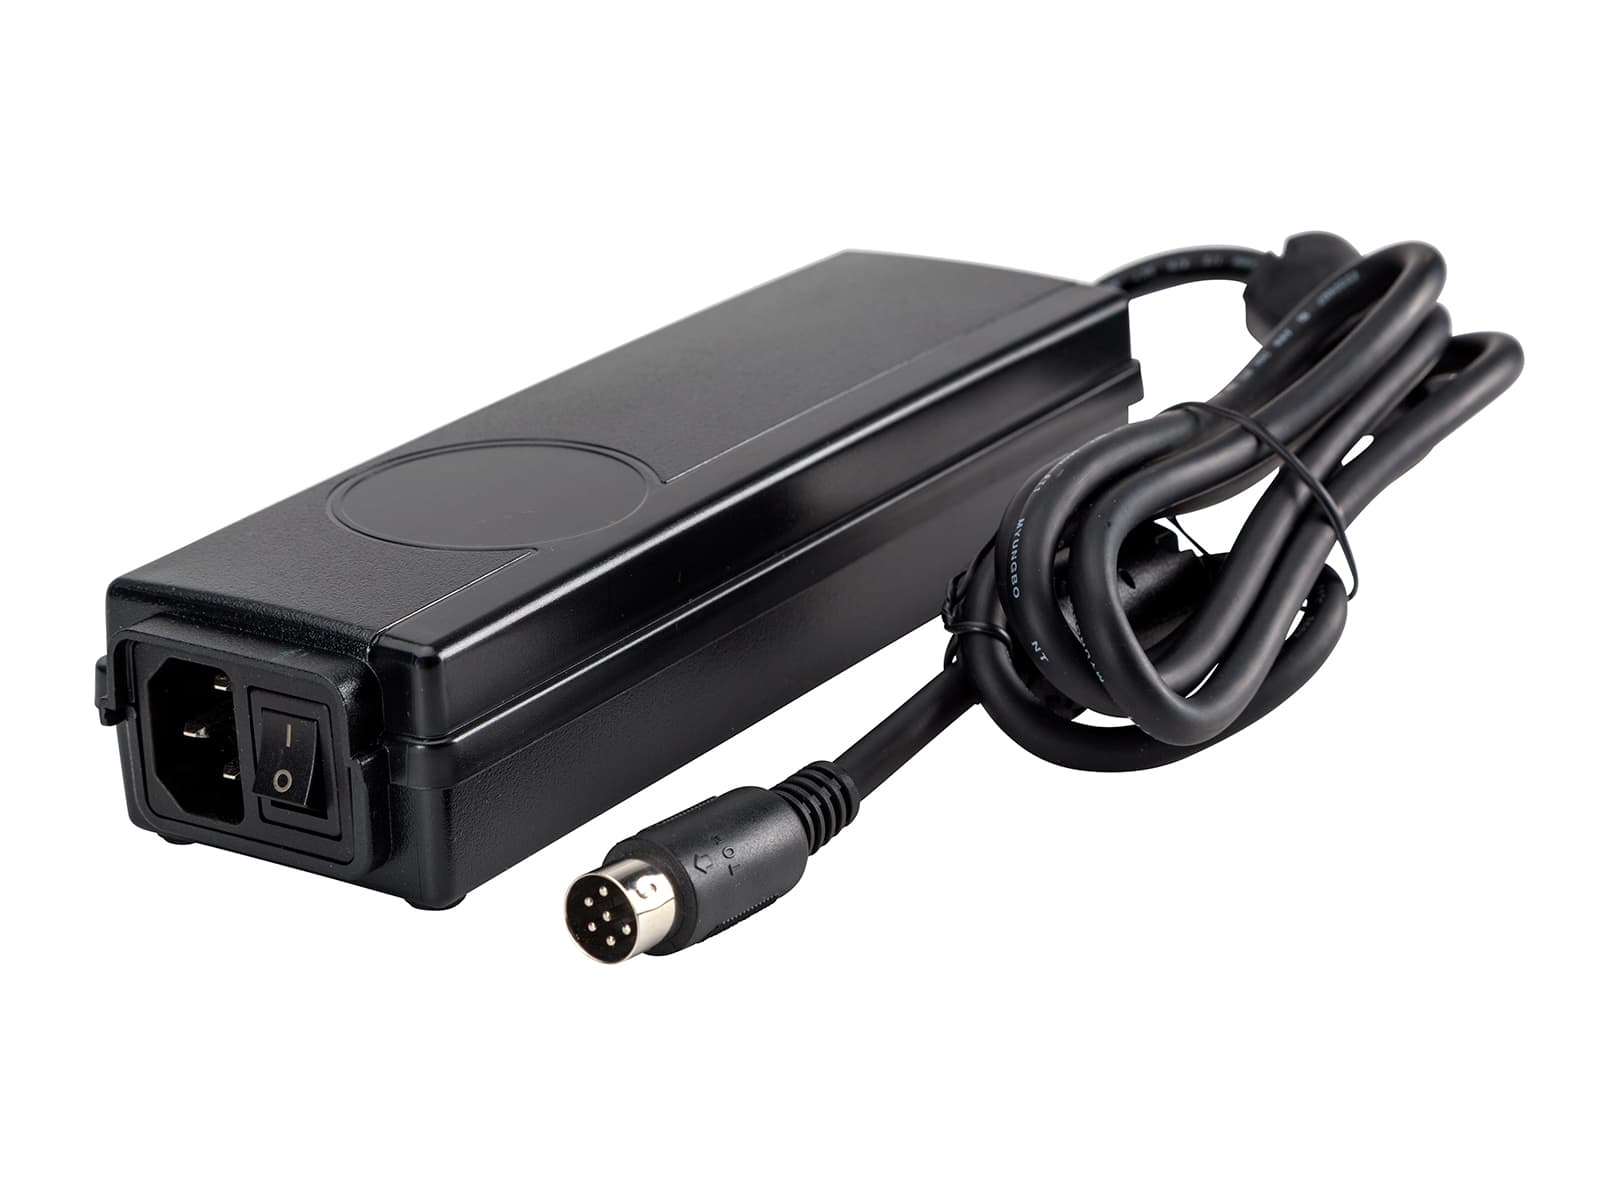 BridgePower Corp. 24V 6.25A Medical Switching Power Supply AC Adapter for NDS Dome Monitors (BPM150S24F05) Monitors.com 